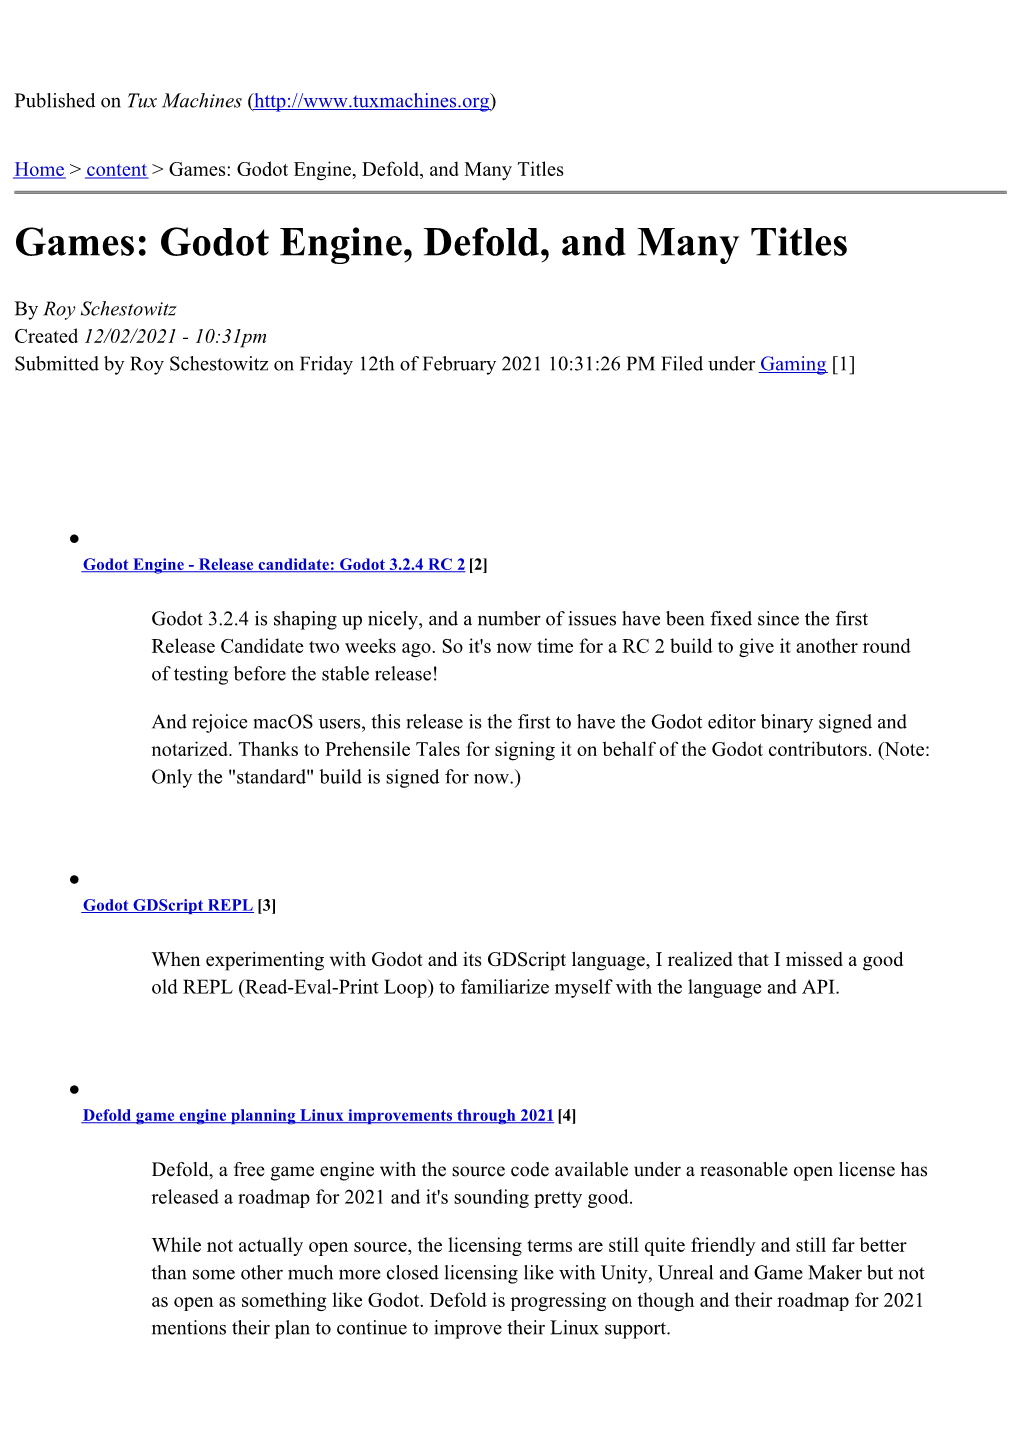 Games: Godot Engine, Defold, and Many Titles